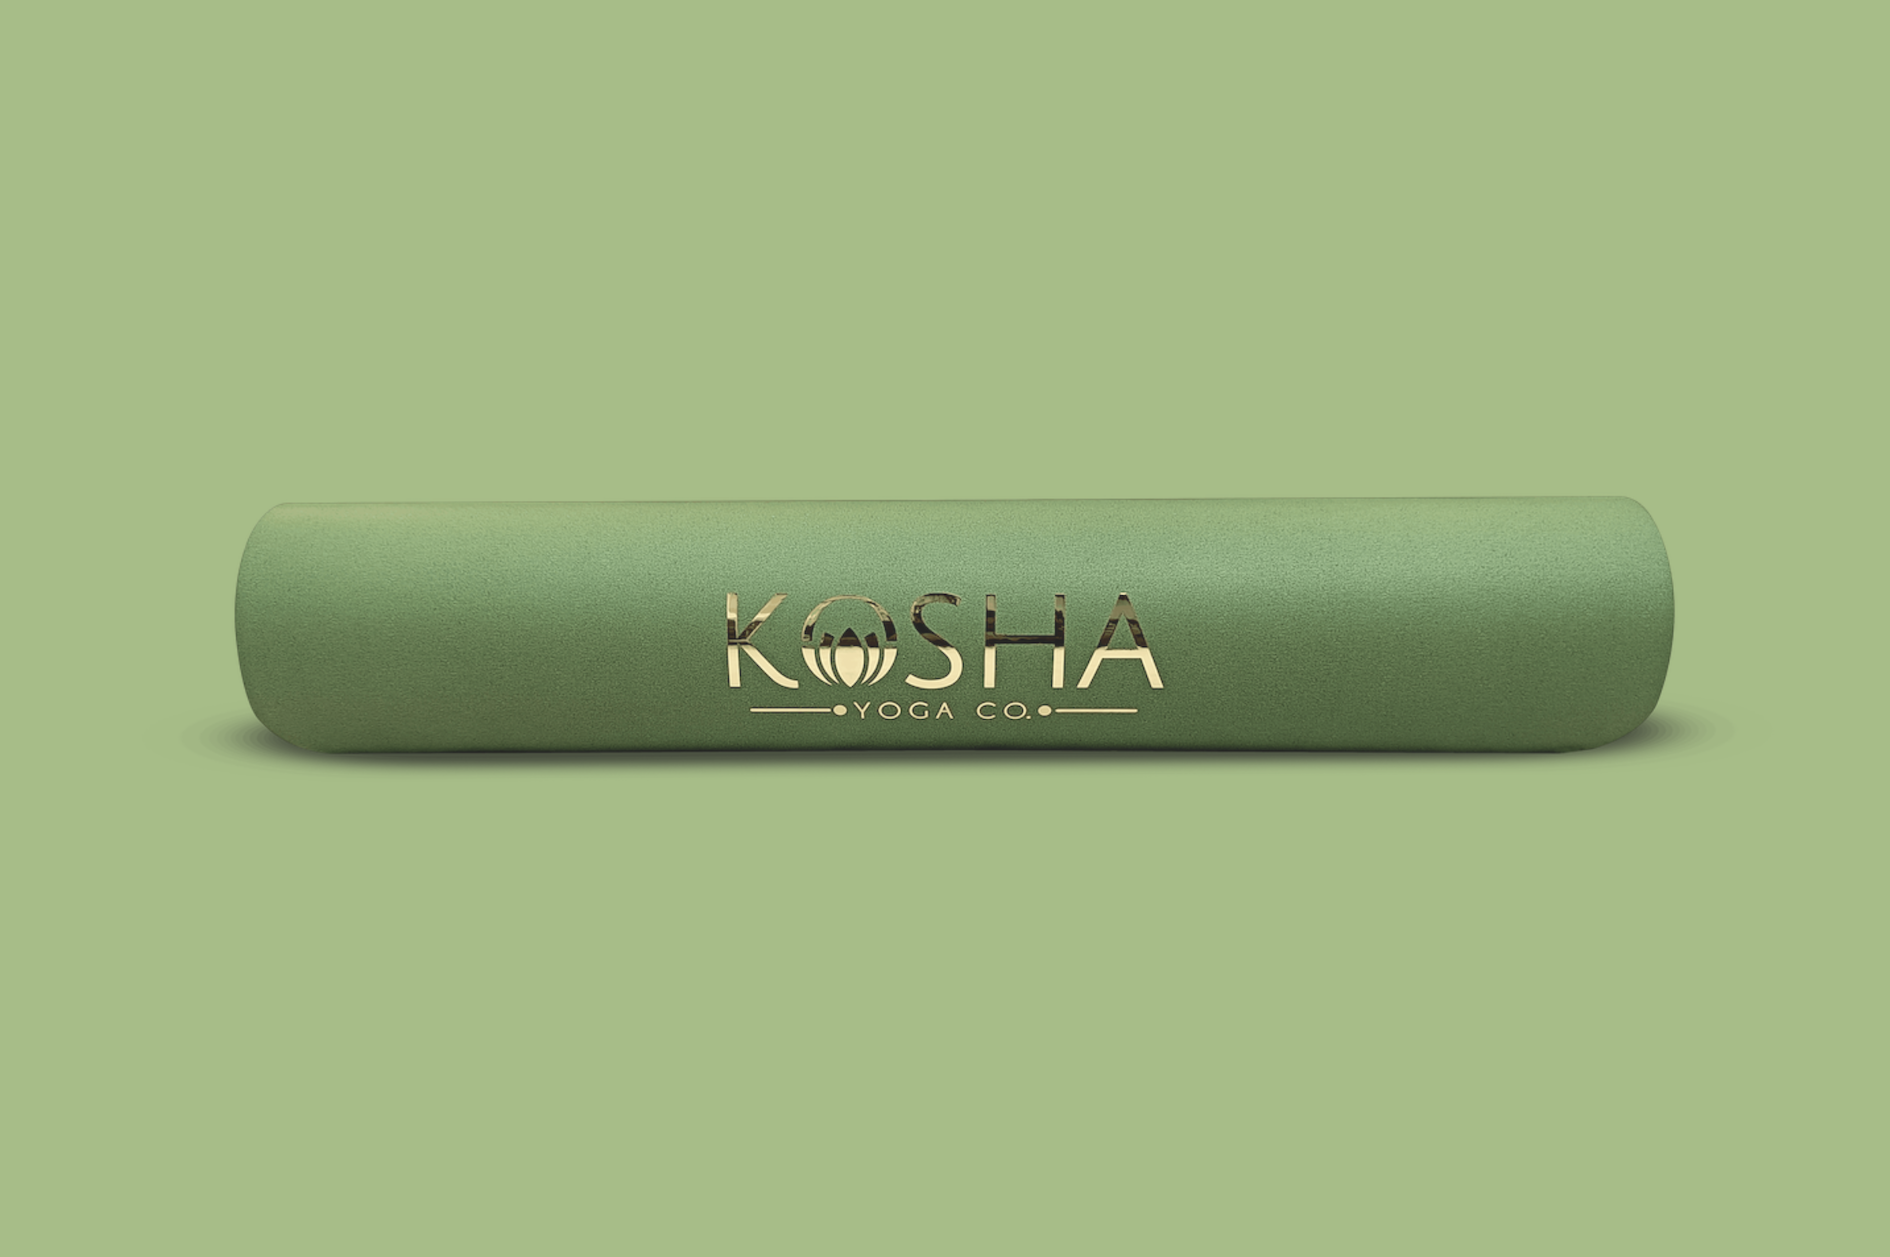 Extra long Sweat Absorbent Non Slip Rubber Yoga Mat With Alignment Lines In green Colour By Kosha Yoga Co